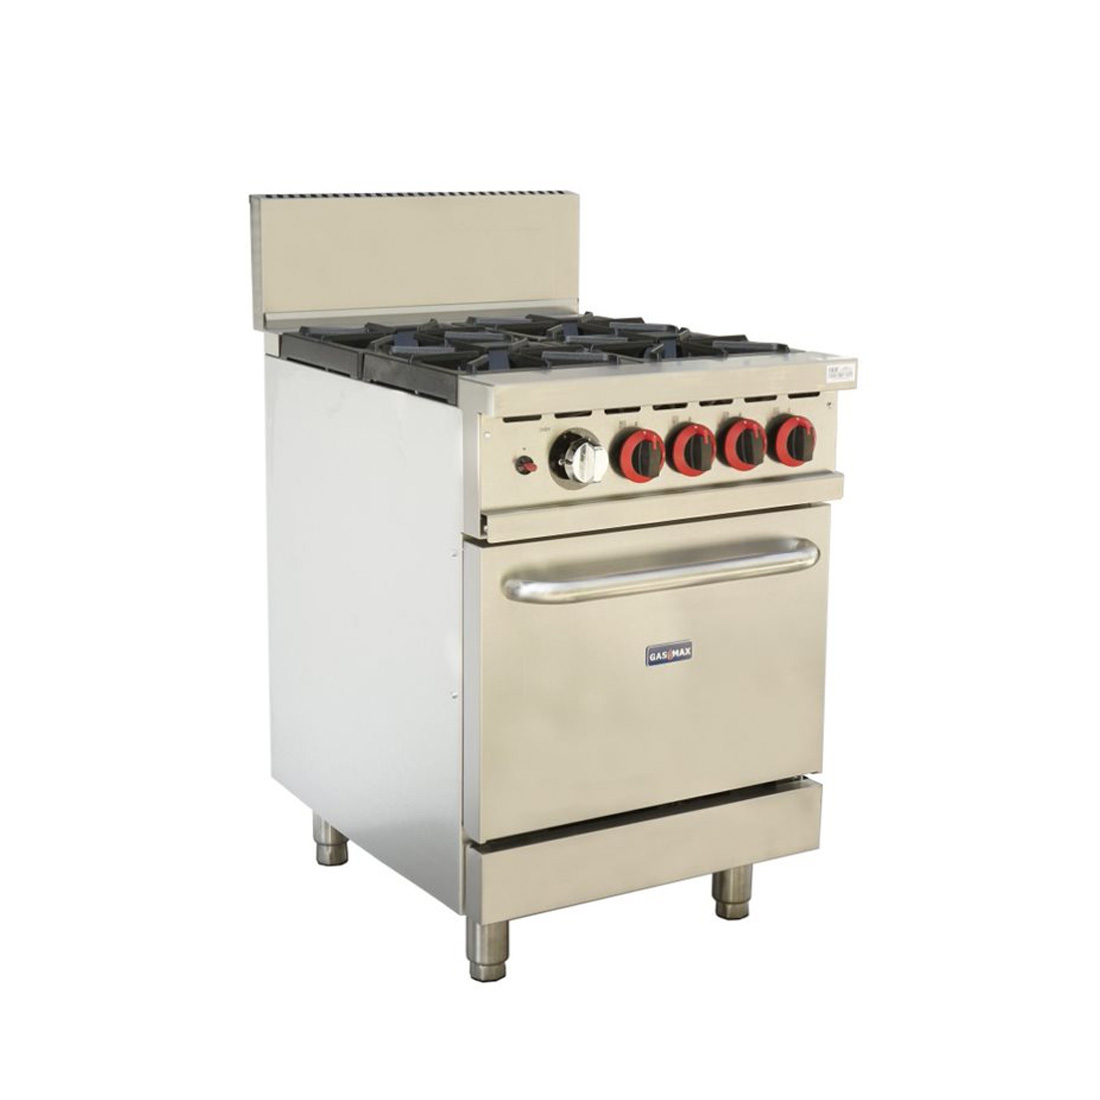 GBS4TULPG Gasmax 4-Burner With Oven Flame Failure